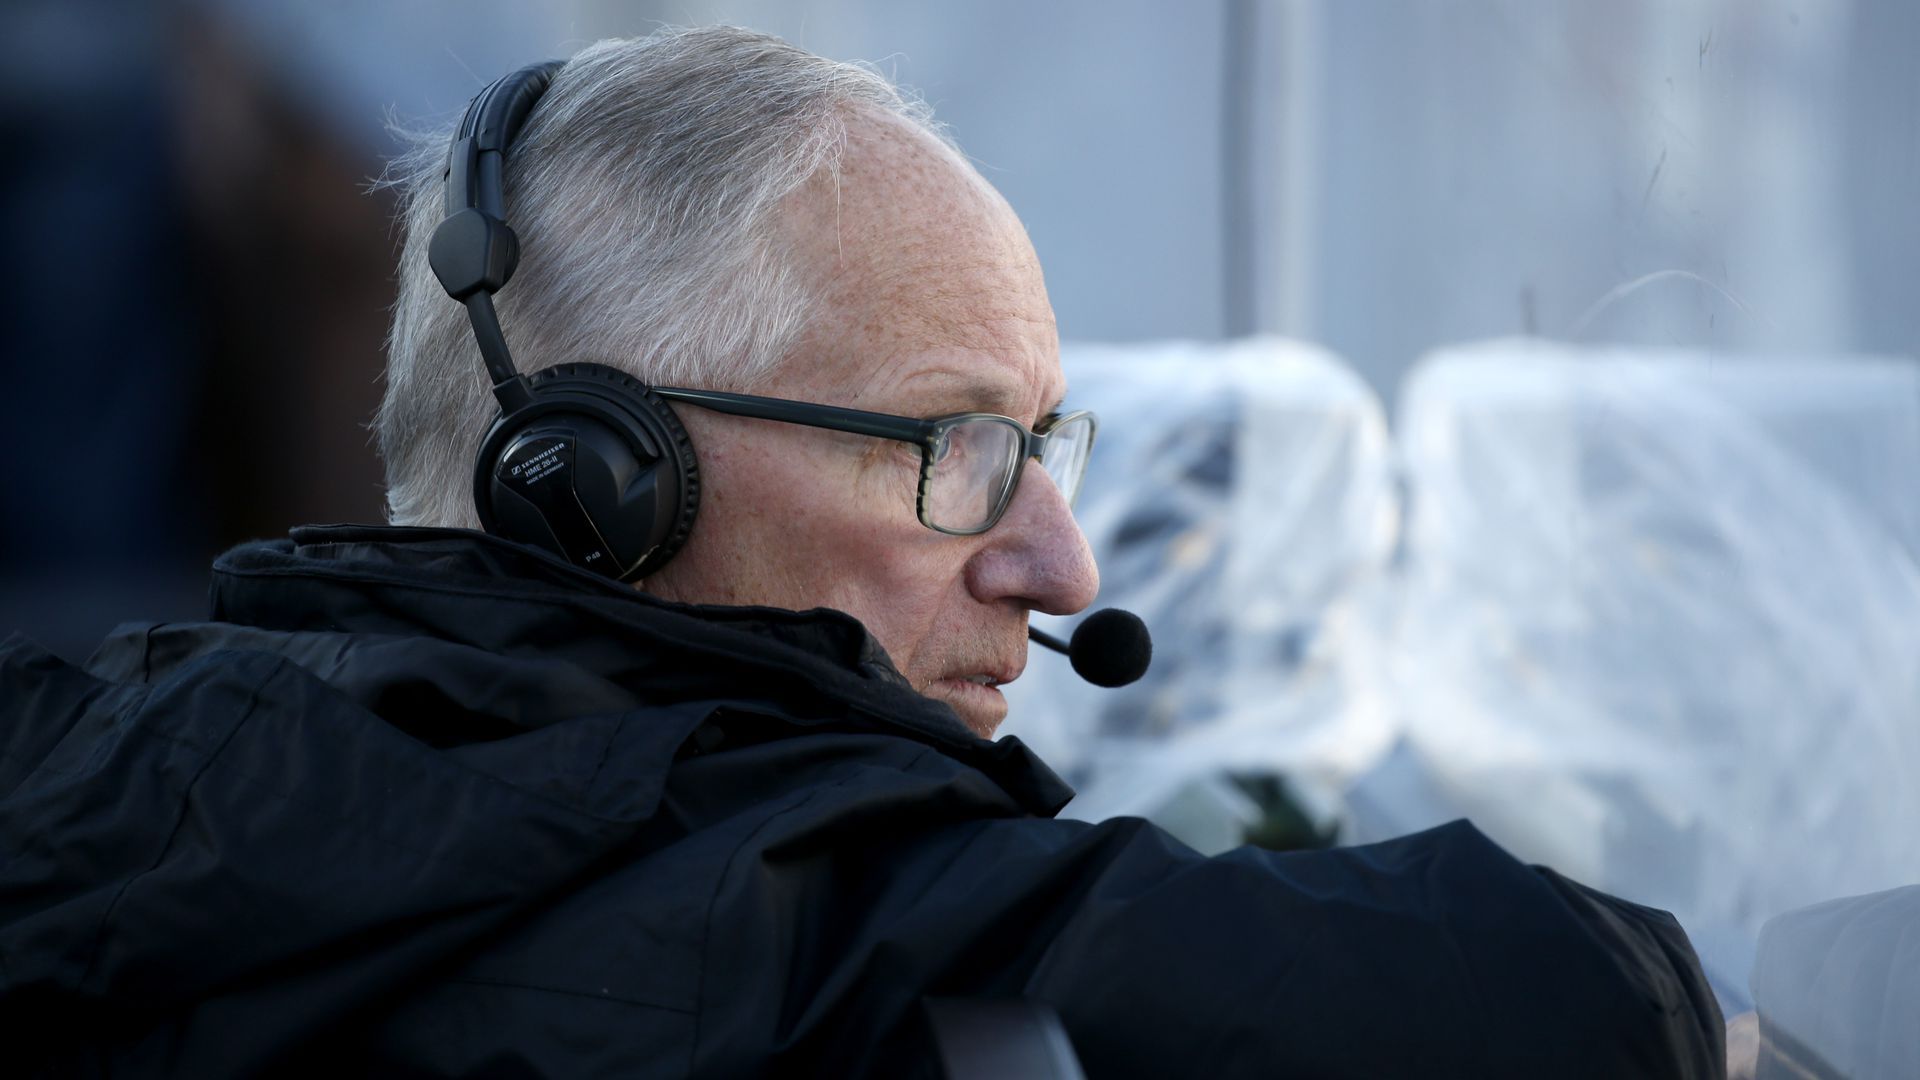 Mike "Doc" Emrick at the 2020 NHL Winter Classic. Photo: Eliot J. Schechter/NHLI via Getty Images